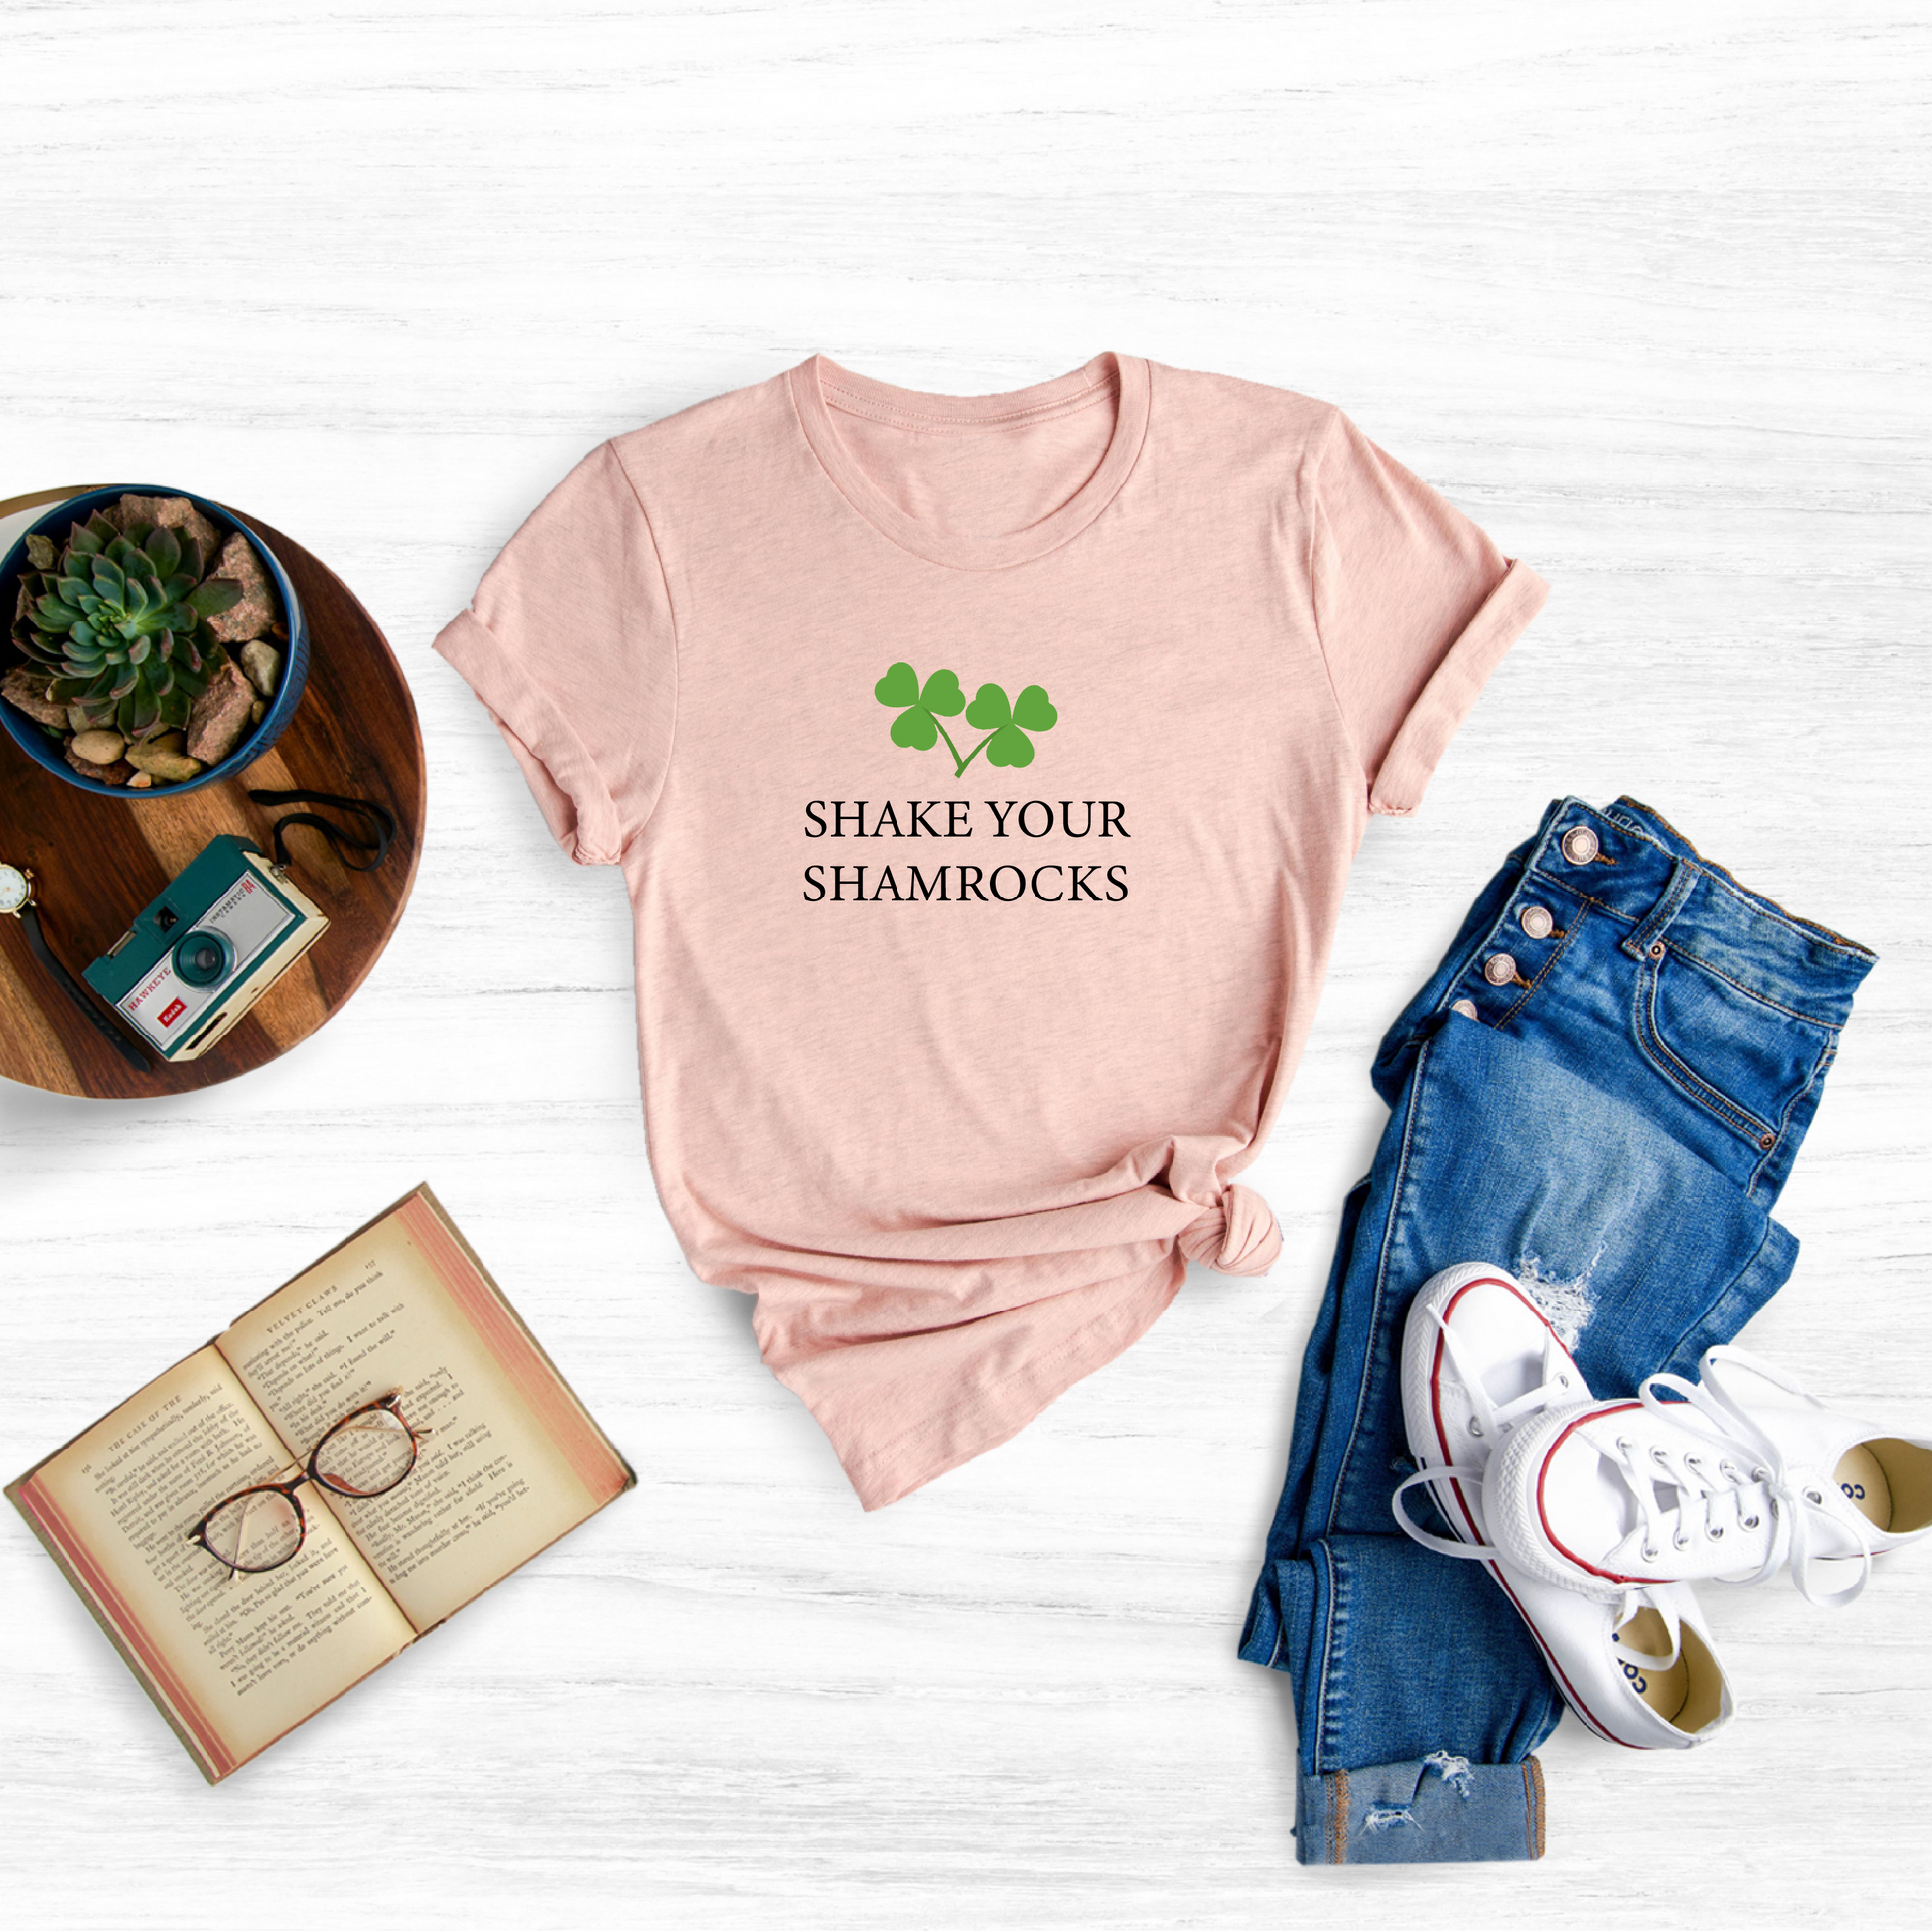 Show off your St. Patrick's Day spirit with this fun "Ladies Shake Your Shamrocks" t-shirt. 